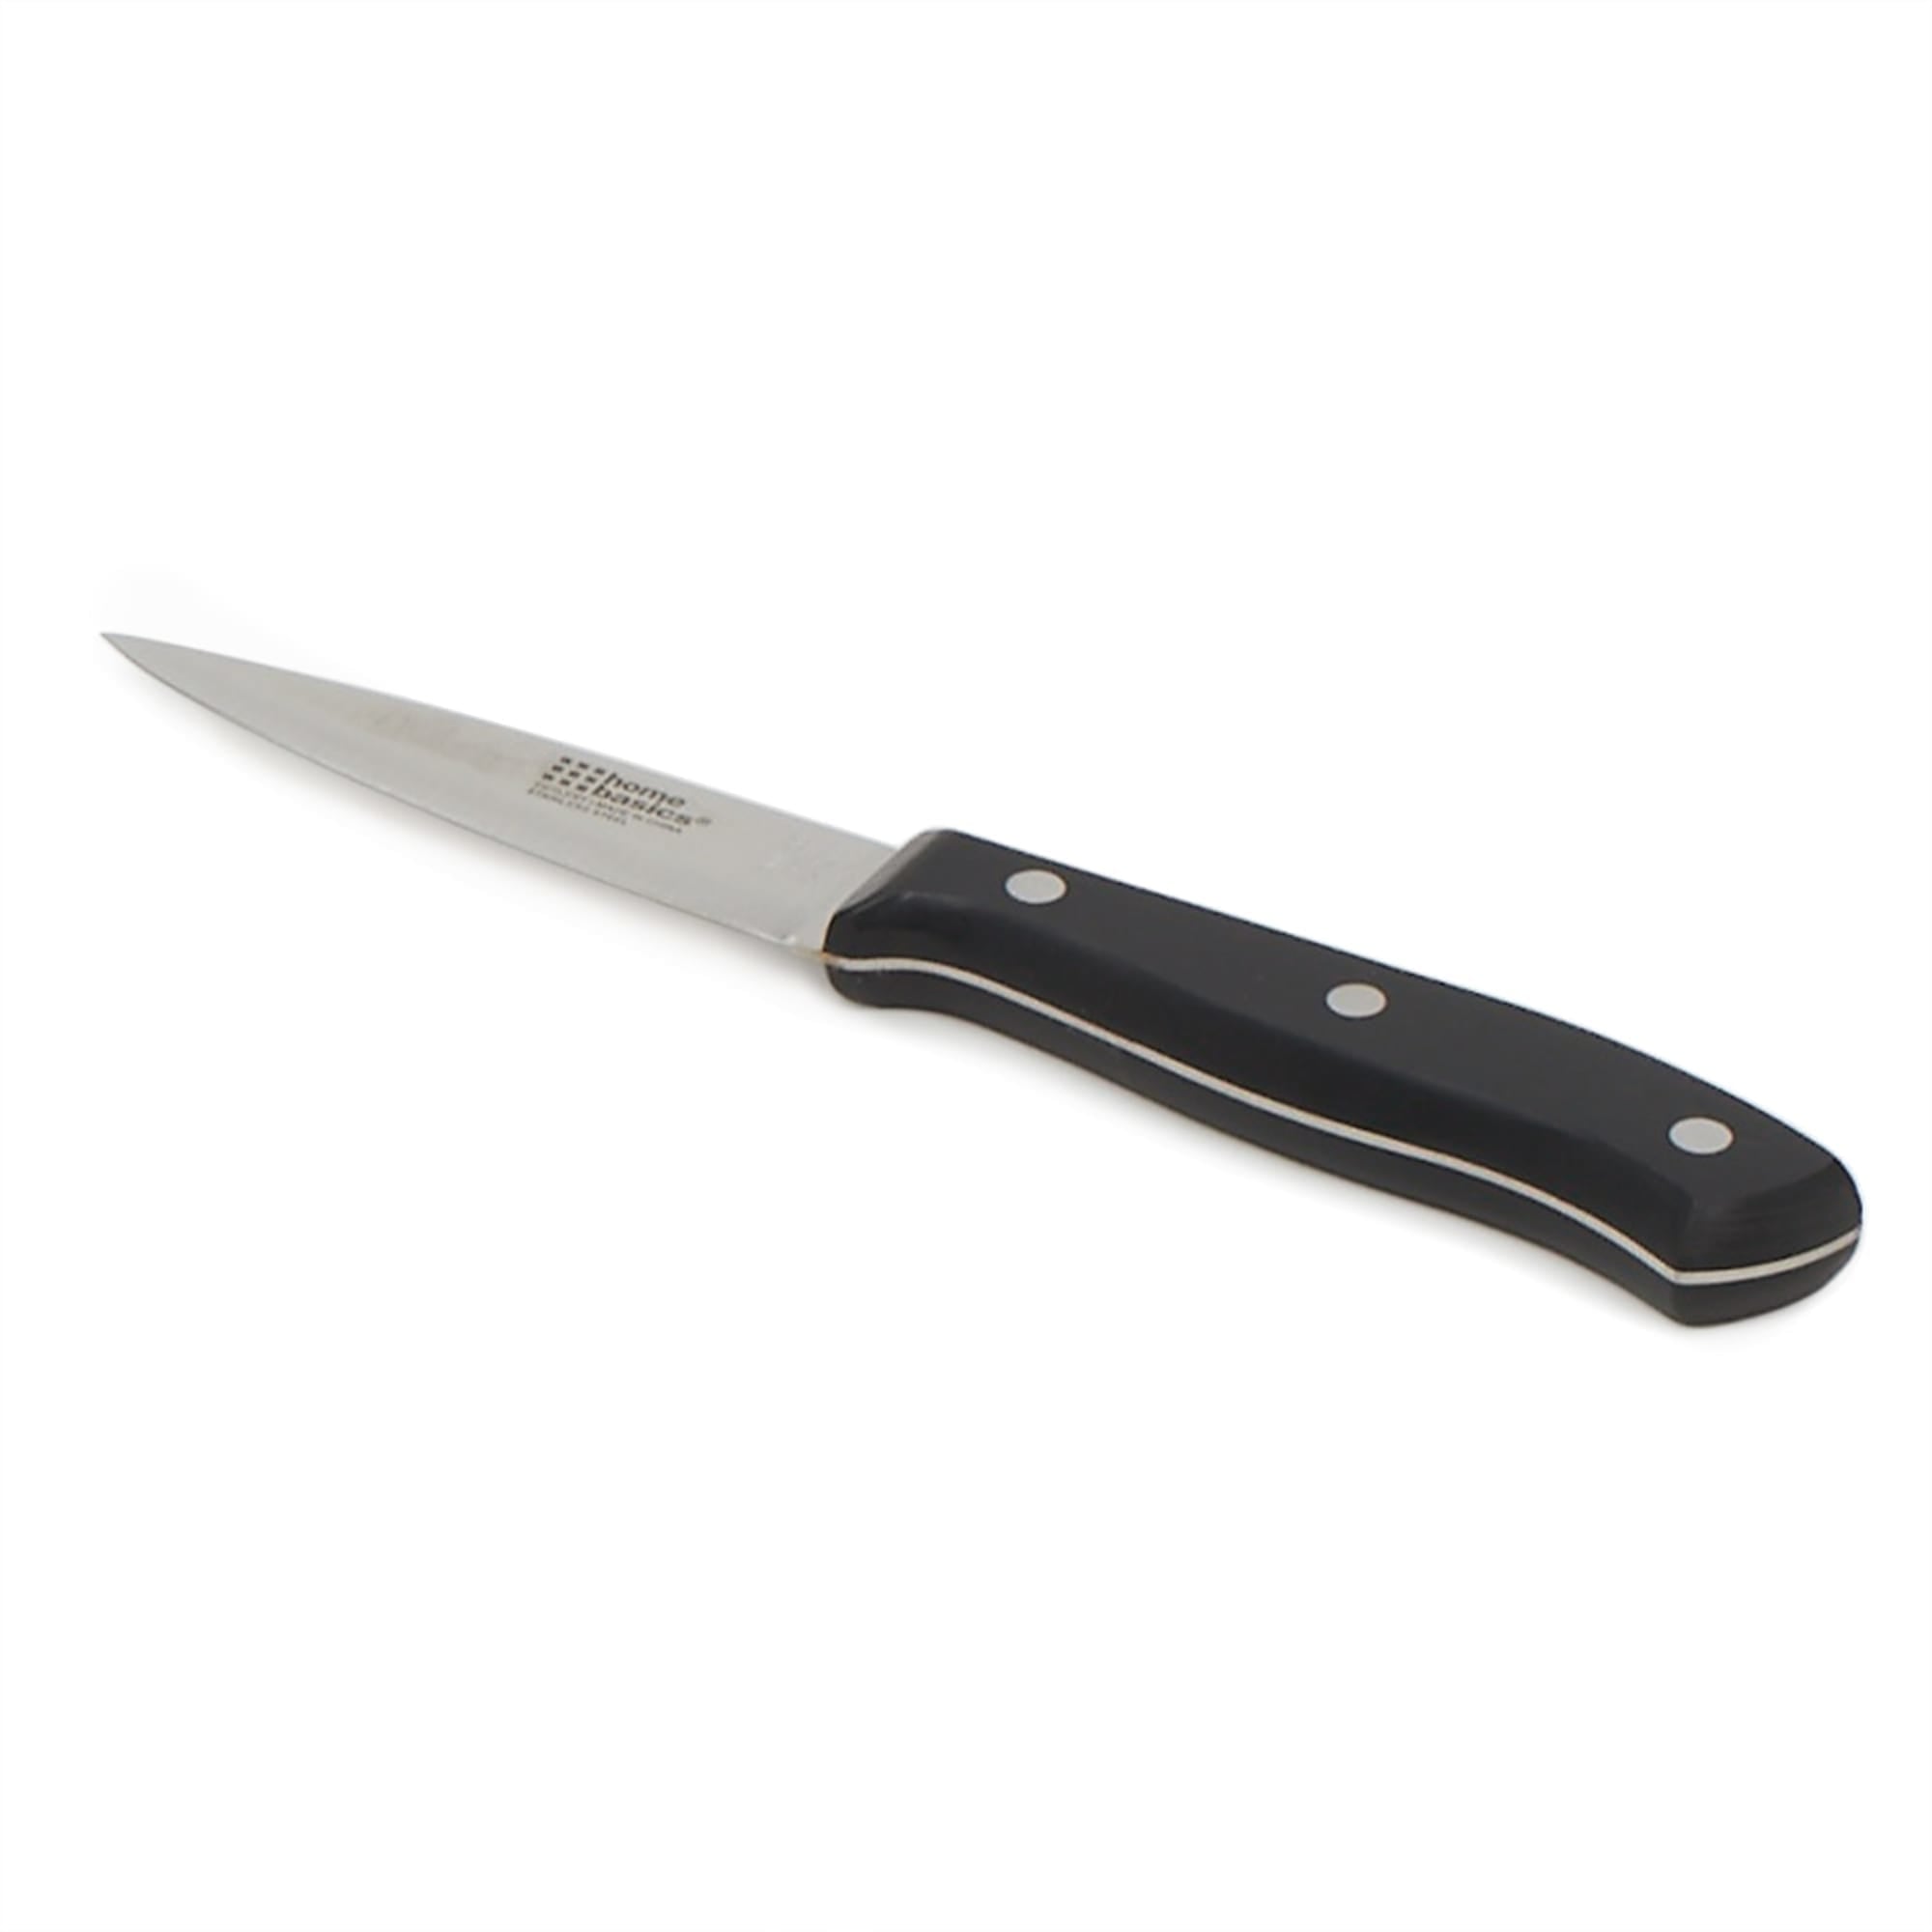 Home Basics 3.5" Stainless Steel Paring Knife with Contoured Bakelite Handle, Black $1.50 EACH, CASE PACK OF 24